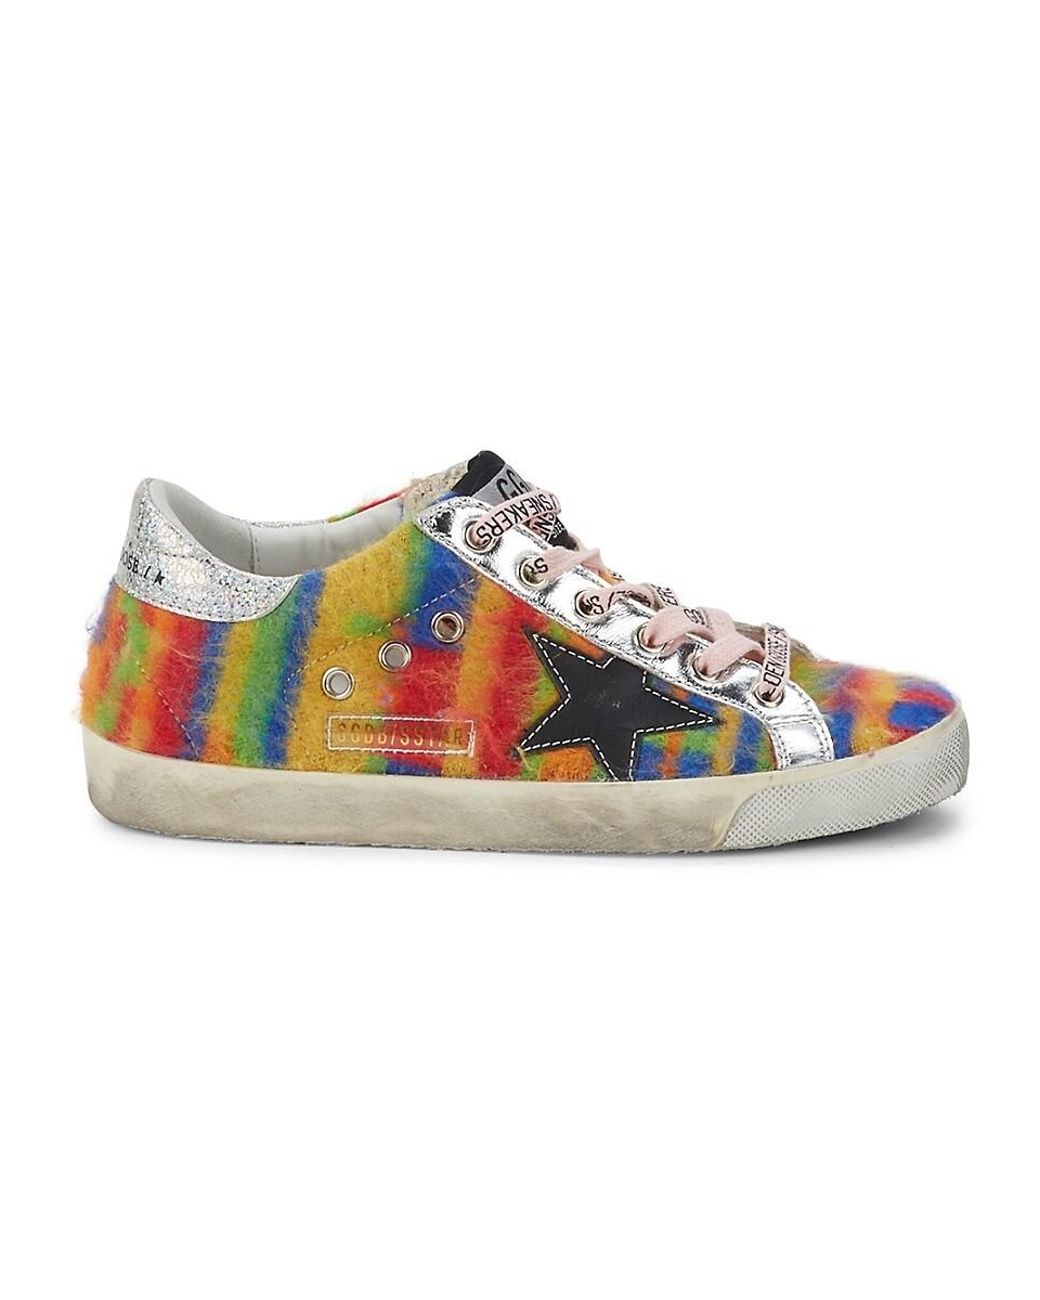 Golden Goose Rainbow Pony Hair Leather Sneakers in Natural | Lyst